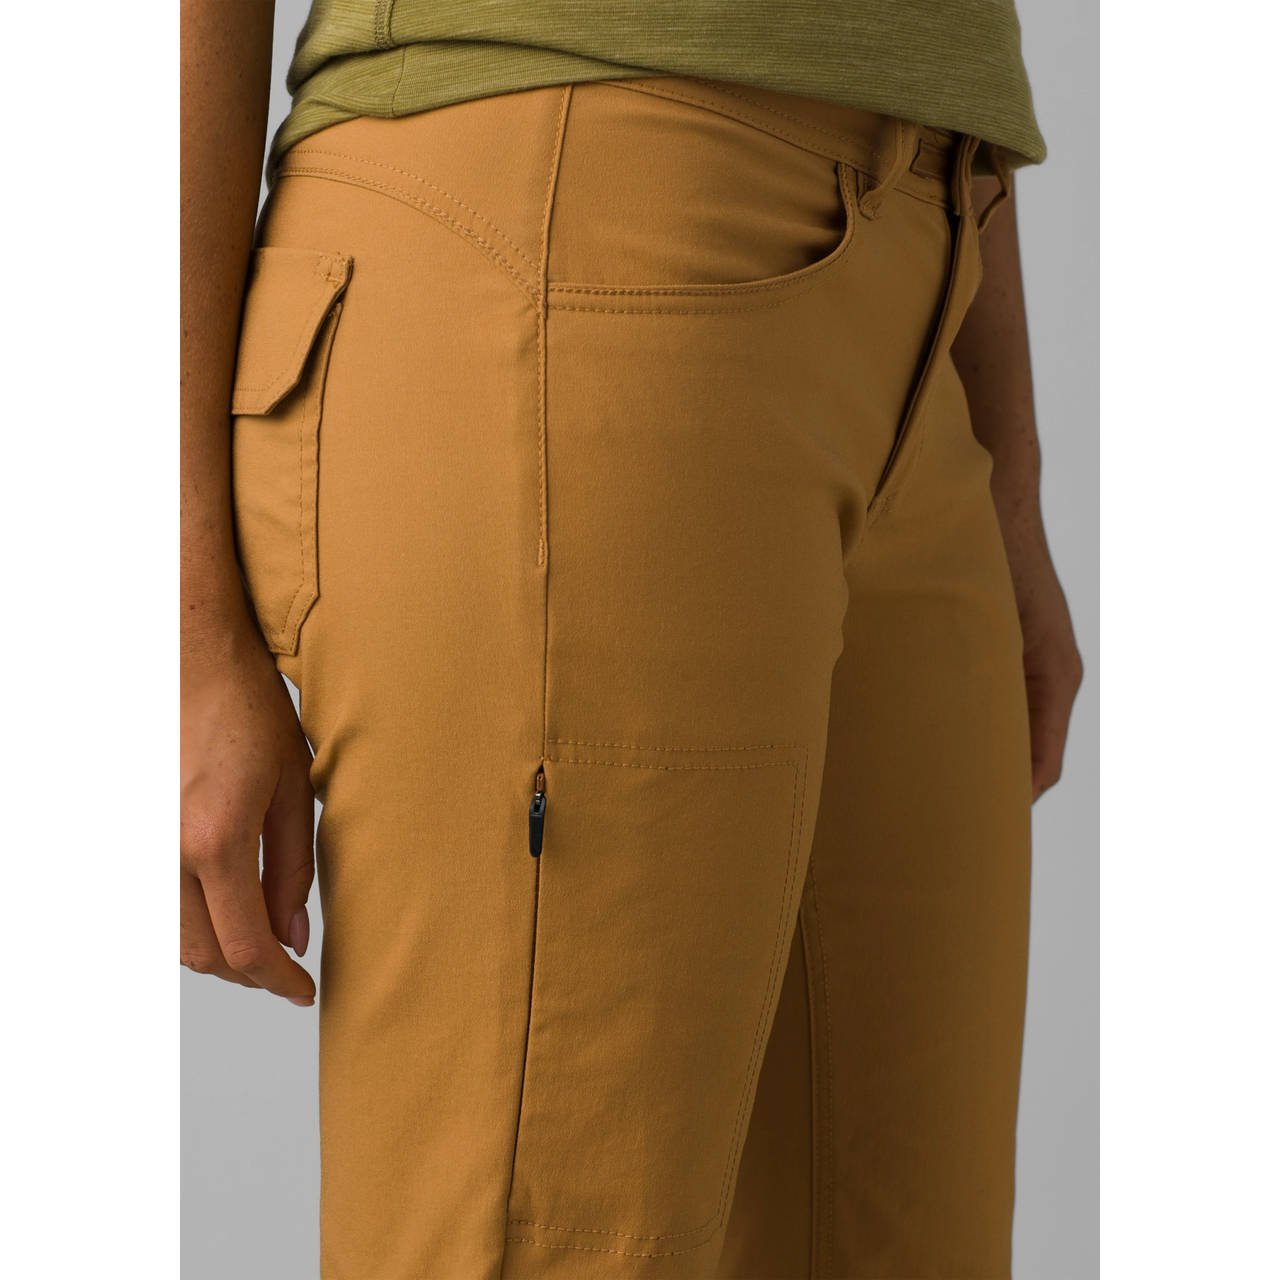 Rab Power Stretch Pro Pants, Reg - Womens, FREE SHIPPING in Canada